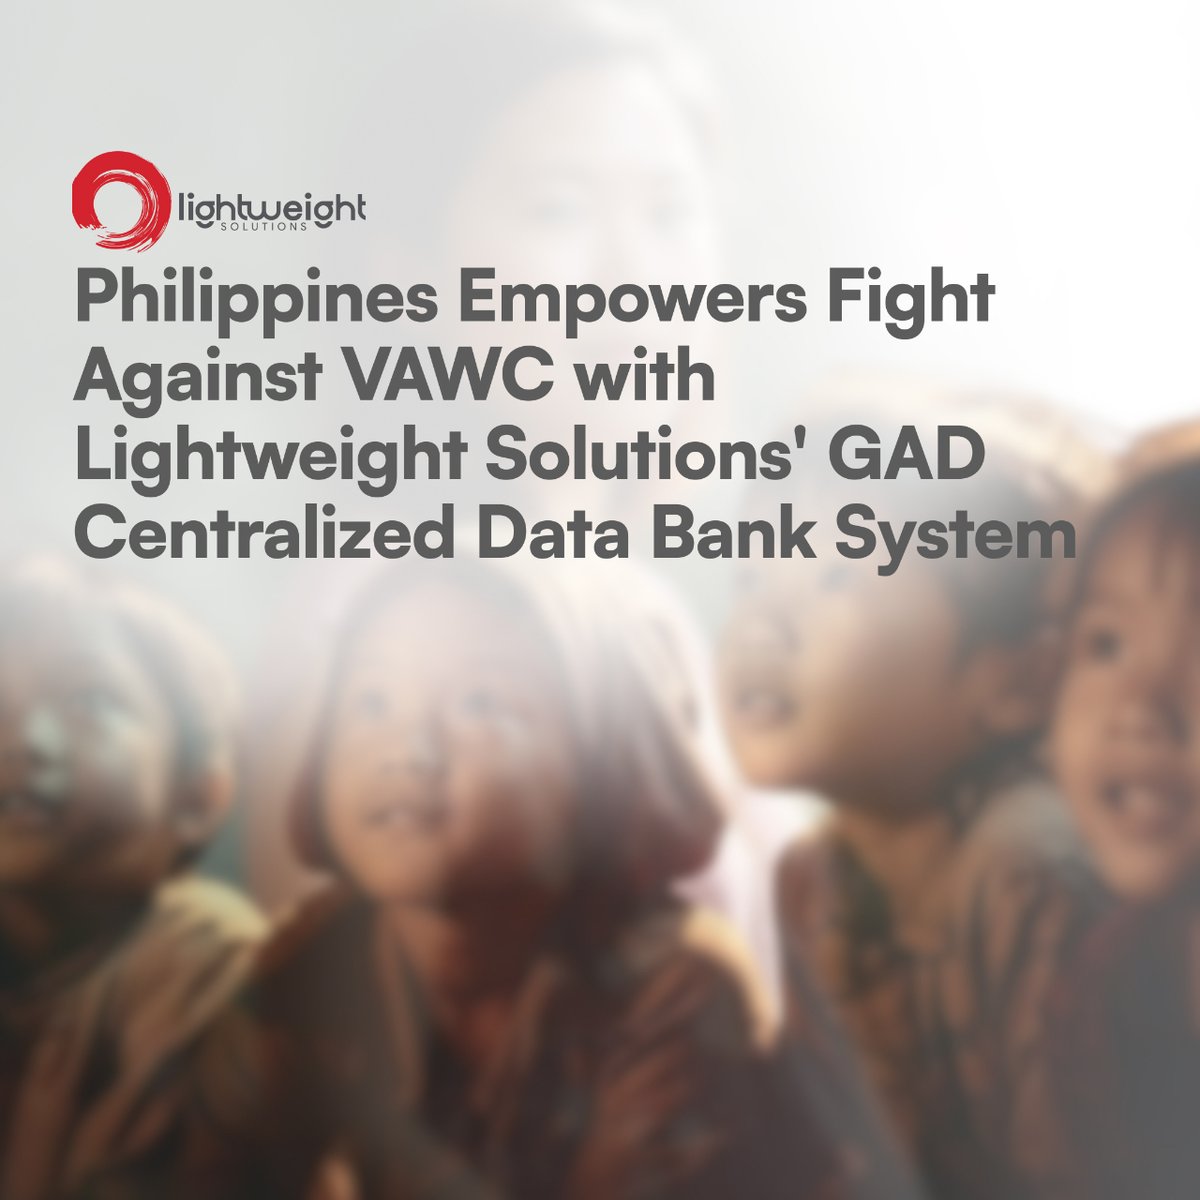 In the fight against VAWC, Lightweight Solutions, a Philippine software development company, plays a crucial role through its innovative GAD Centralized Data Bank System (GAD-CDBS).

#VAWC #lightweightsolutions #softwarecompany

Read more: lightweightsolutions.co/philippines-em…